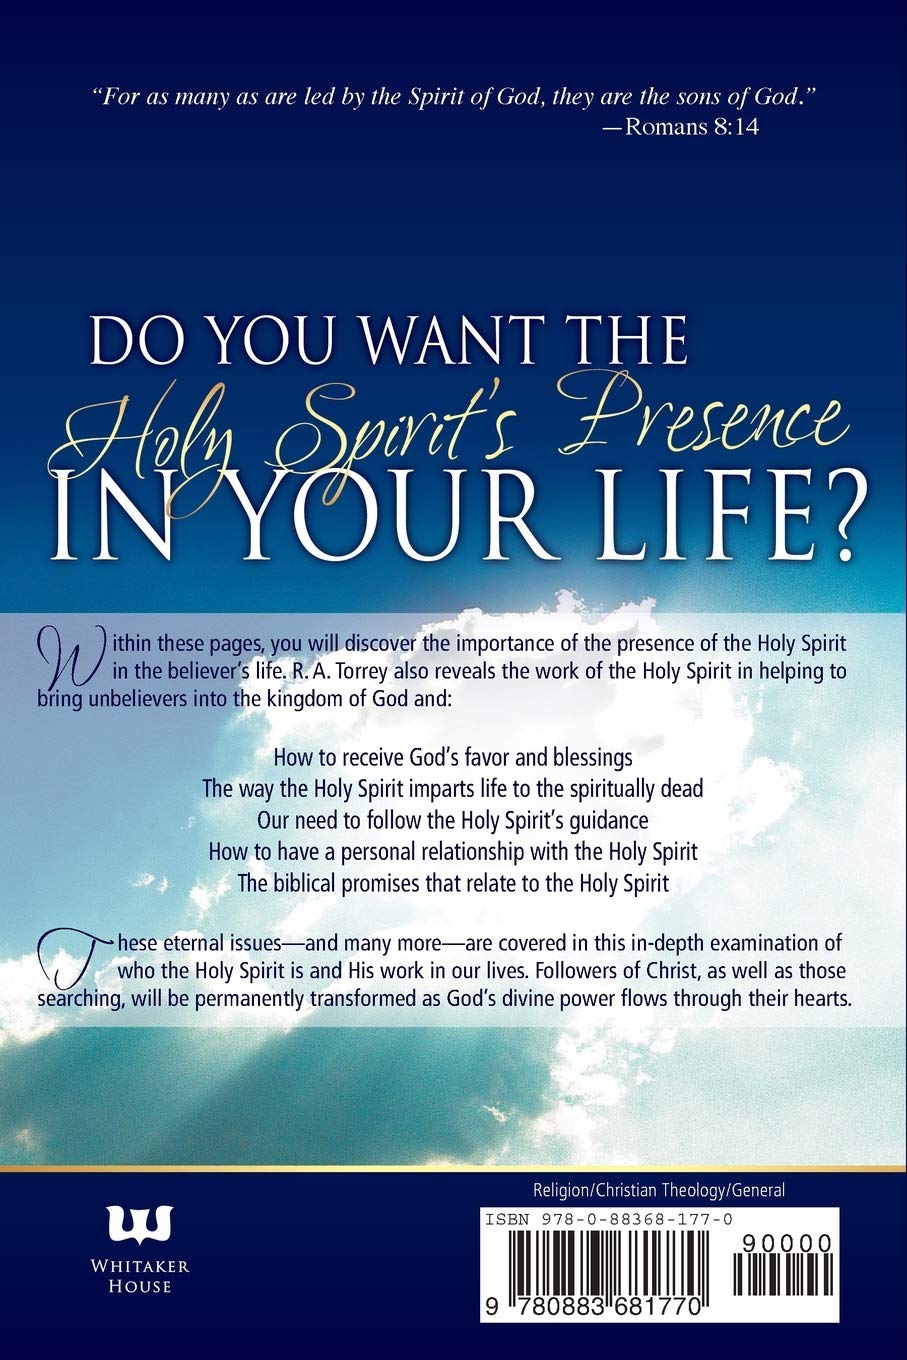 The Presence and Work of the Holy Spirit